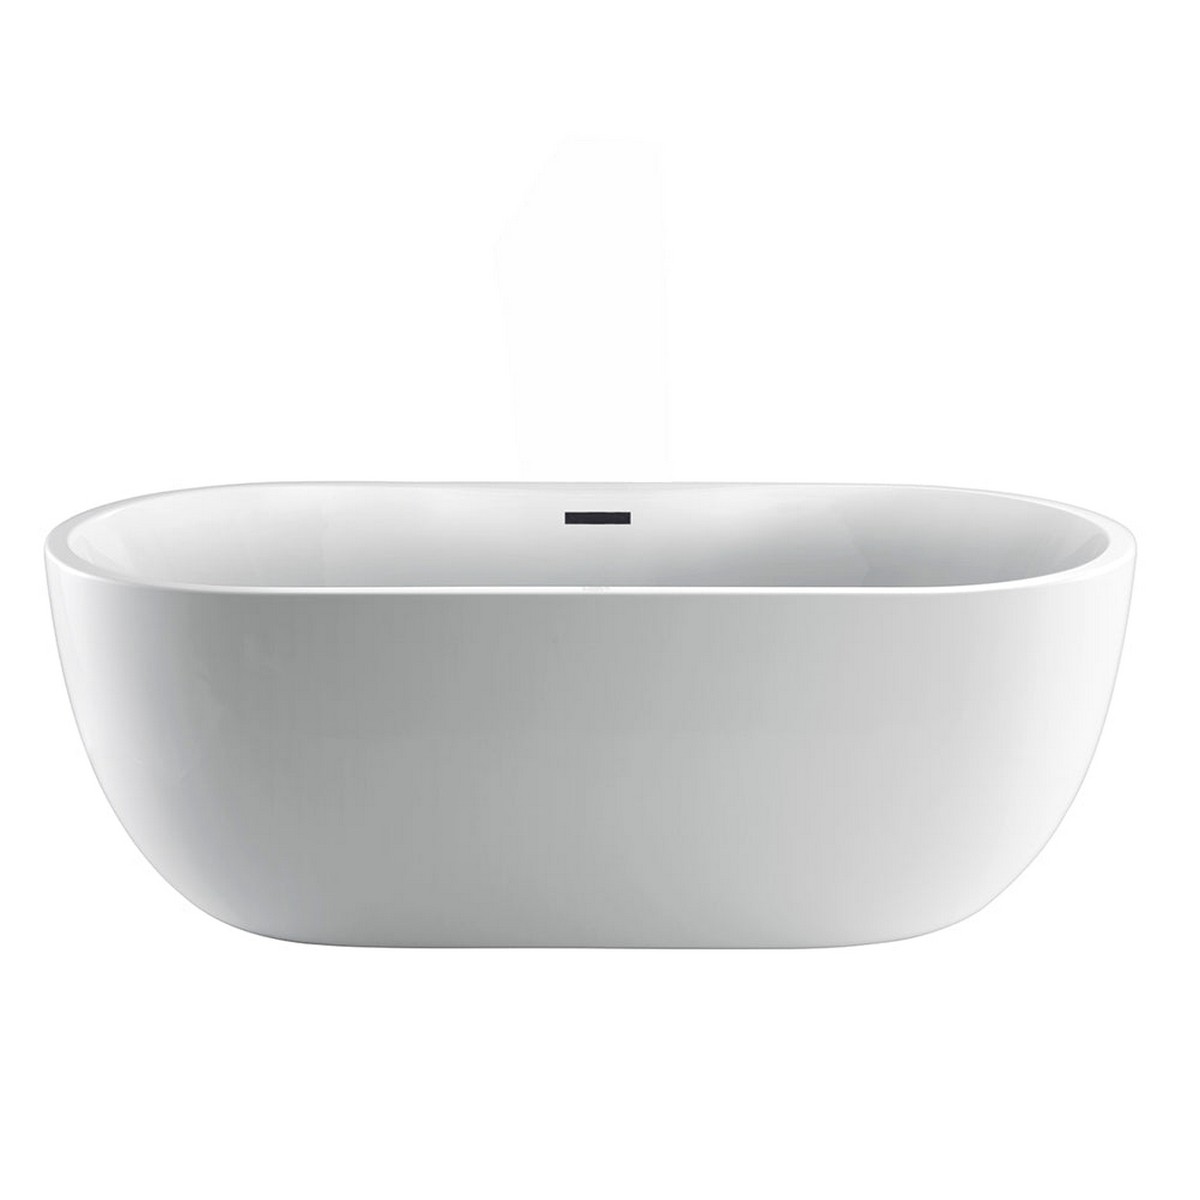 BARCLAY ATOV7H65FIG PILAR 65 INCH ACRYLIC FREESTANDING OVAL SOAKING BATHTUB IN WHITE WITH INTEGRAL DRAIN AND OVERFLOW AND 7 INCH RIM HOLES